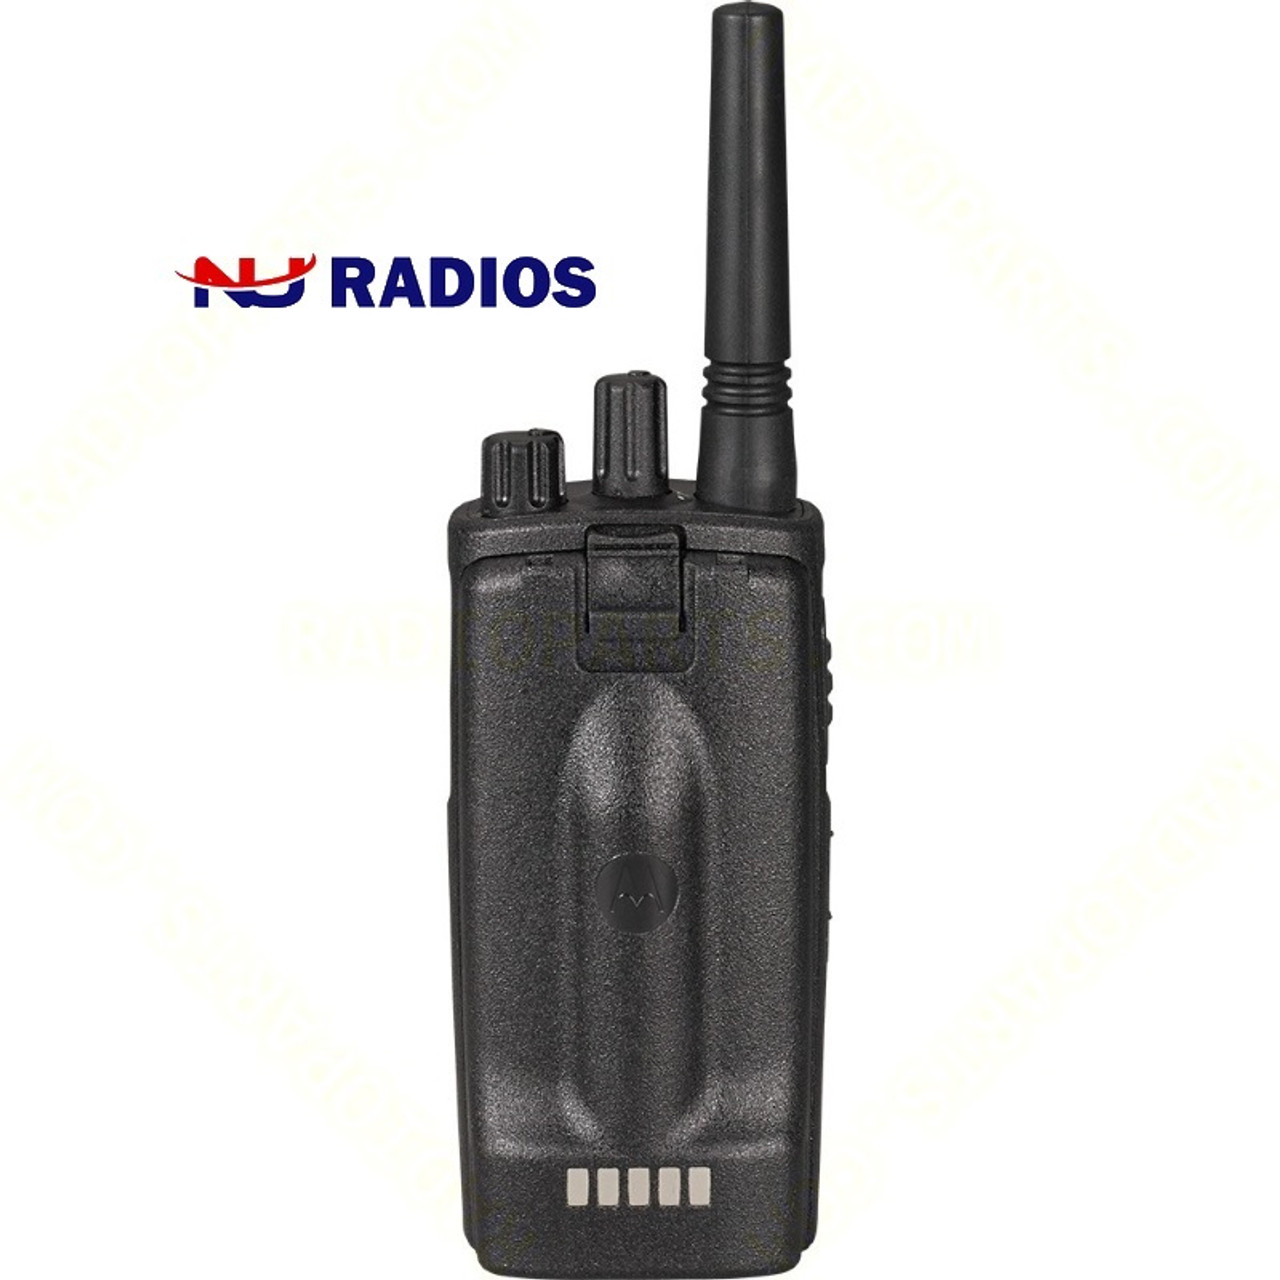 Motorola six pack of RMV2080 radios with NOAA are great for outdoor use and  companies that want an easy to use radio that is durable